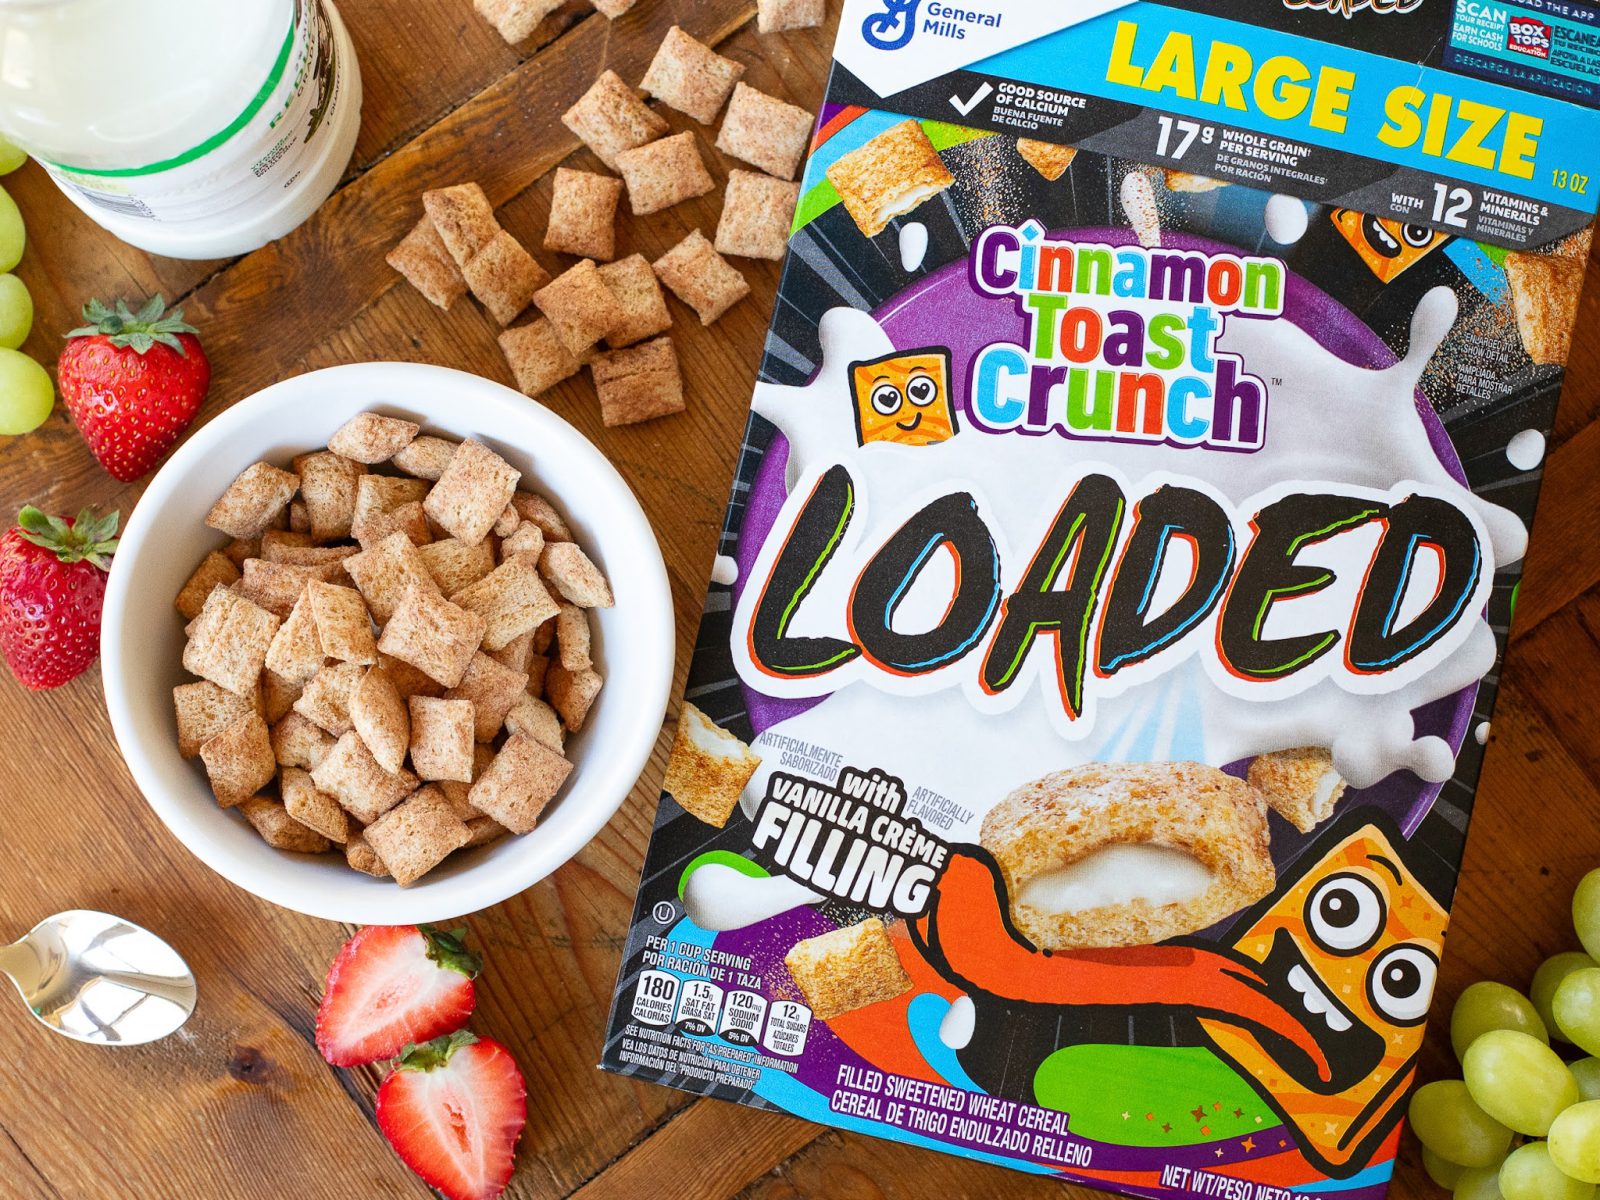 General Mills Loaded Cereal Large Boxes As Low As 49¢ Per Box At Kroger